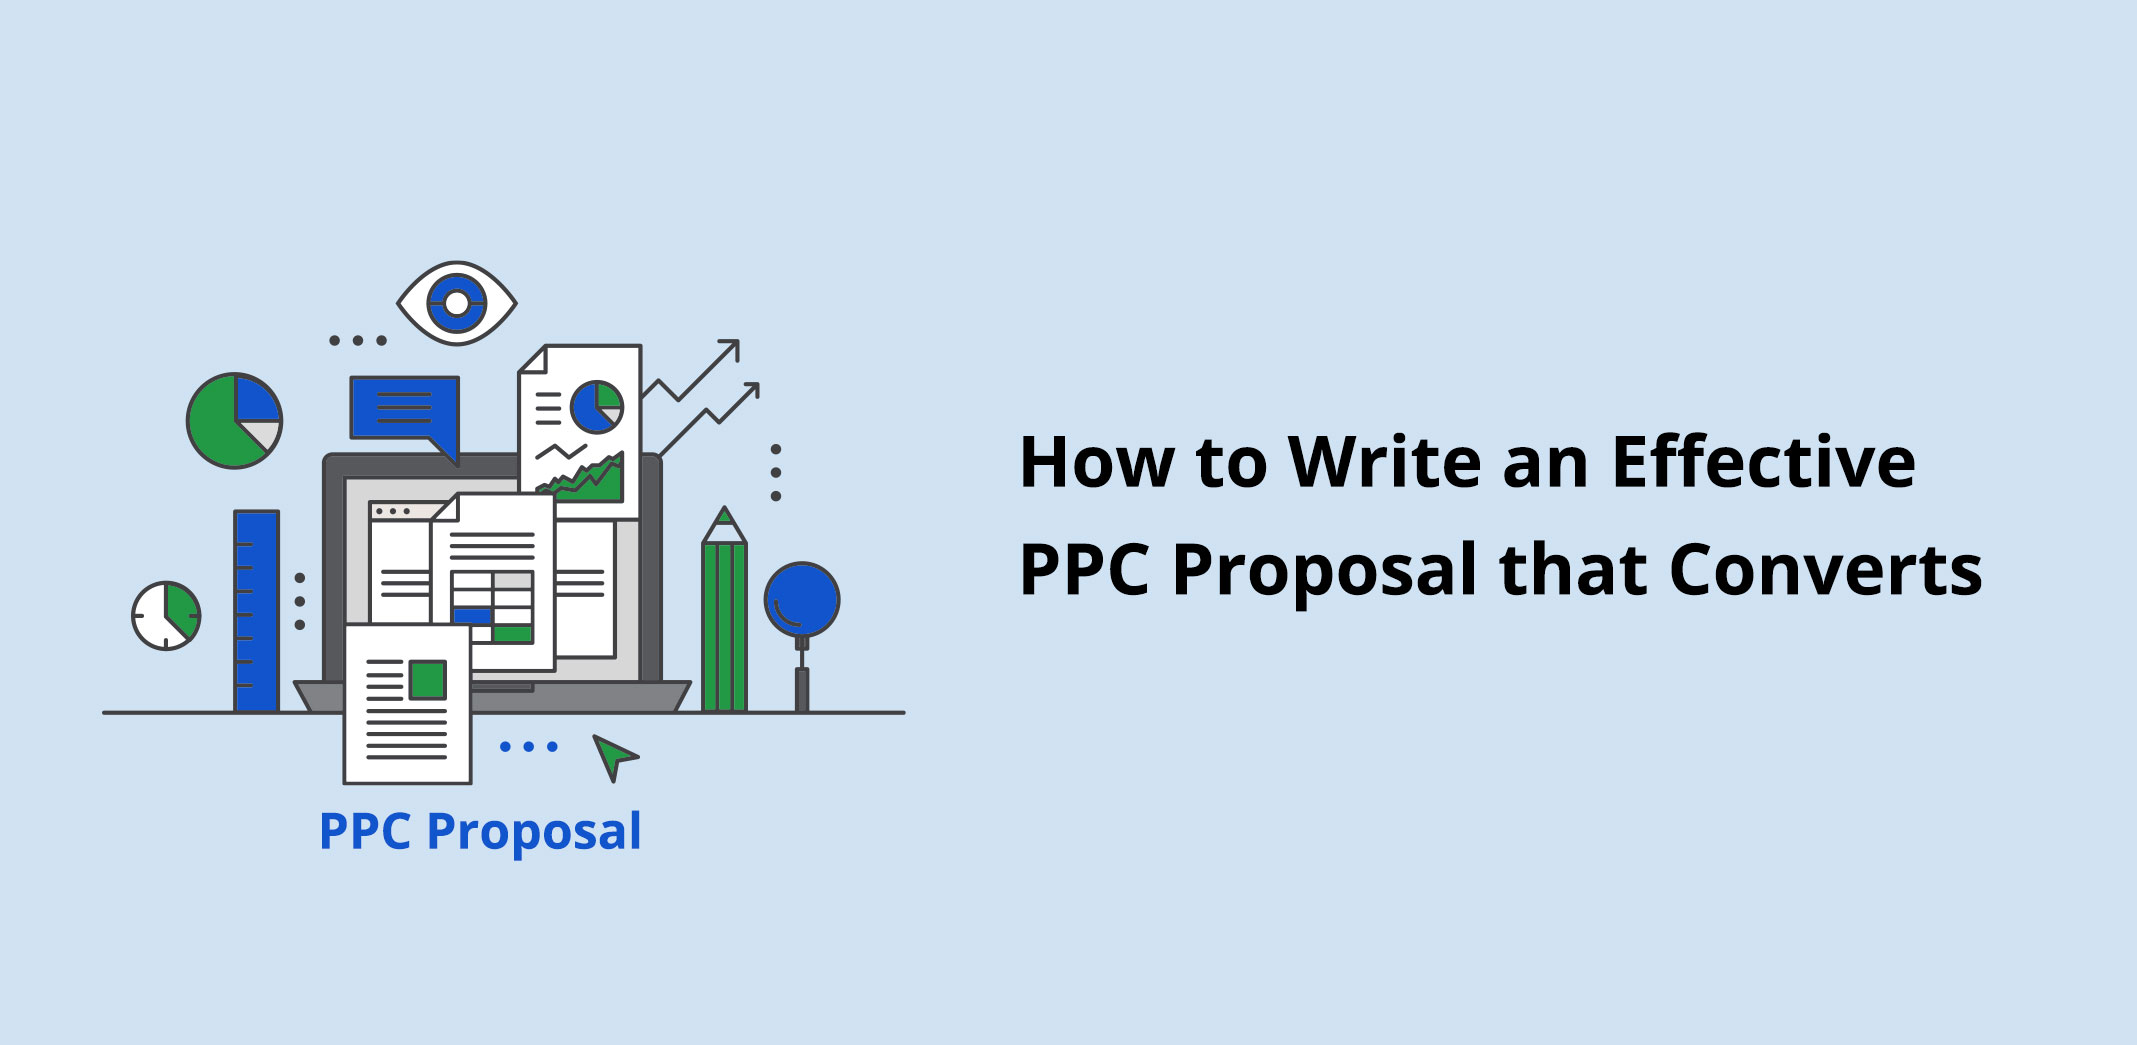 How to Write an Effective PPC Proposal that Converts